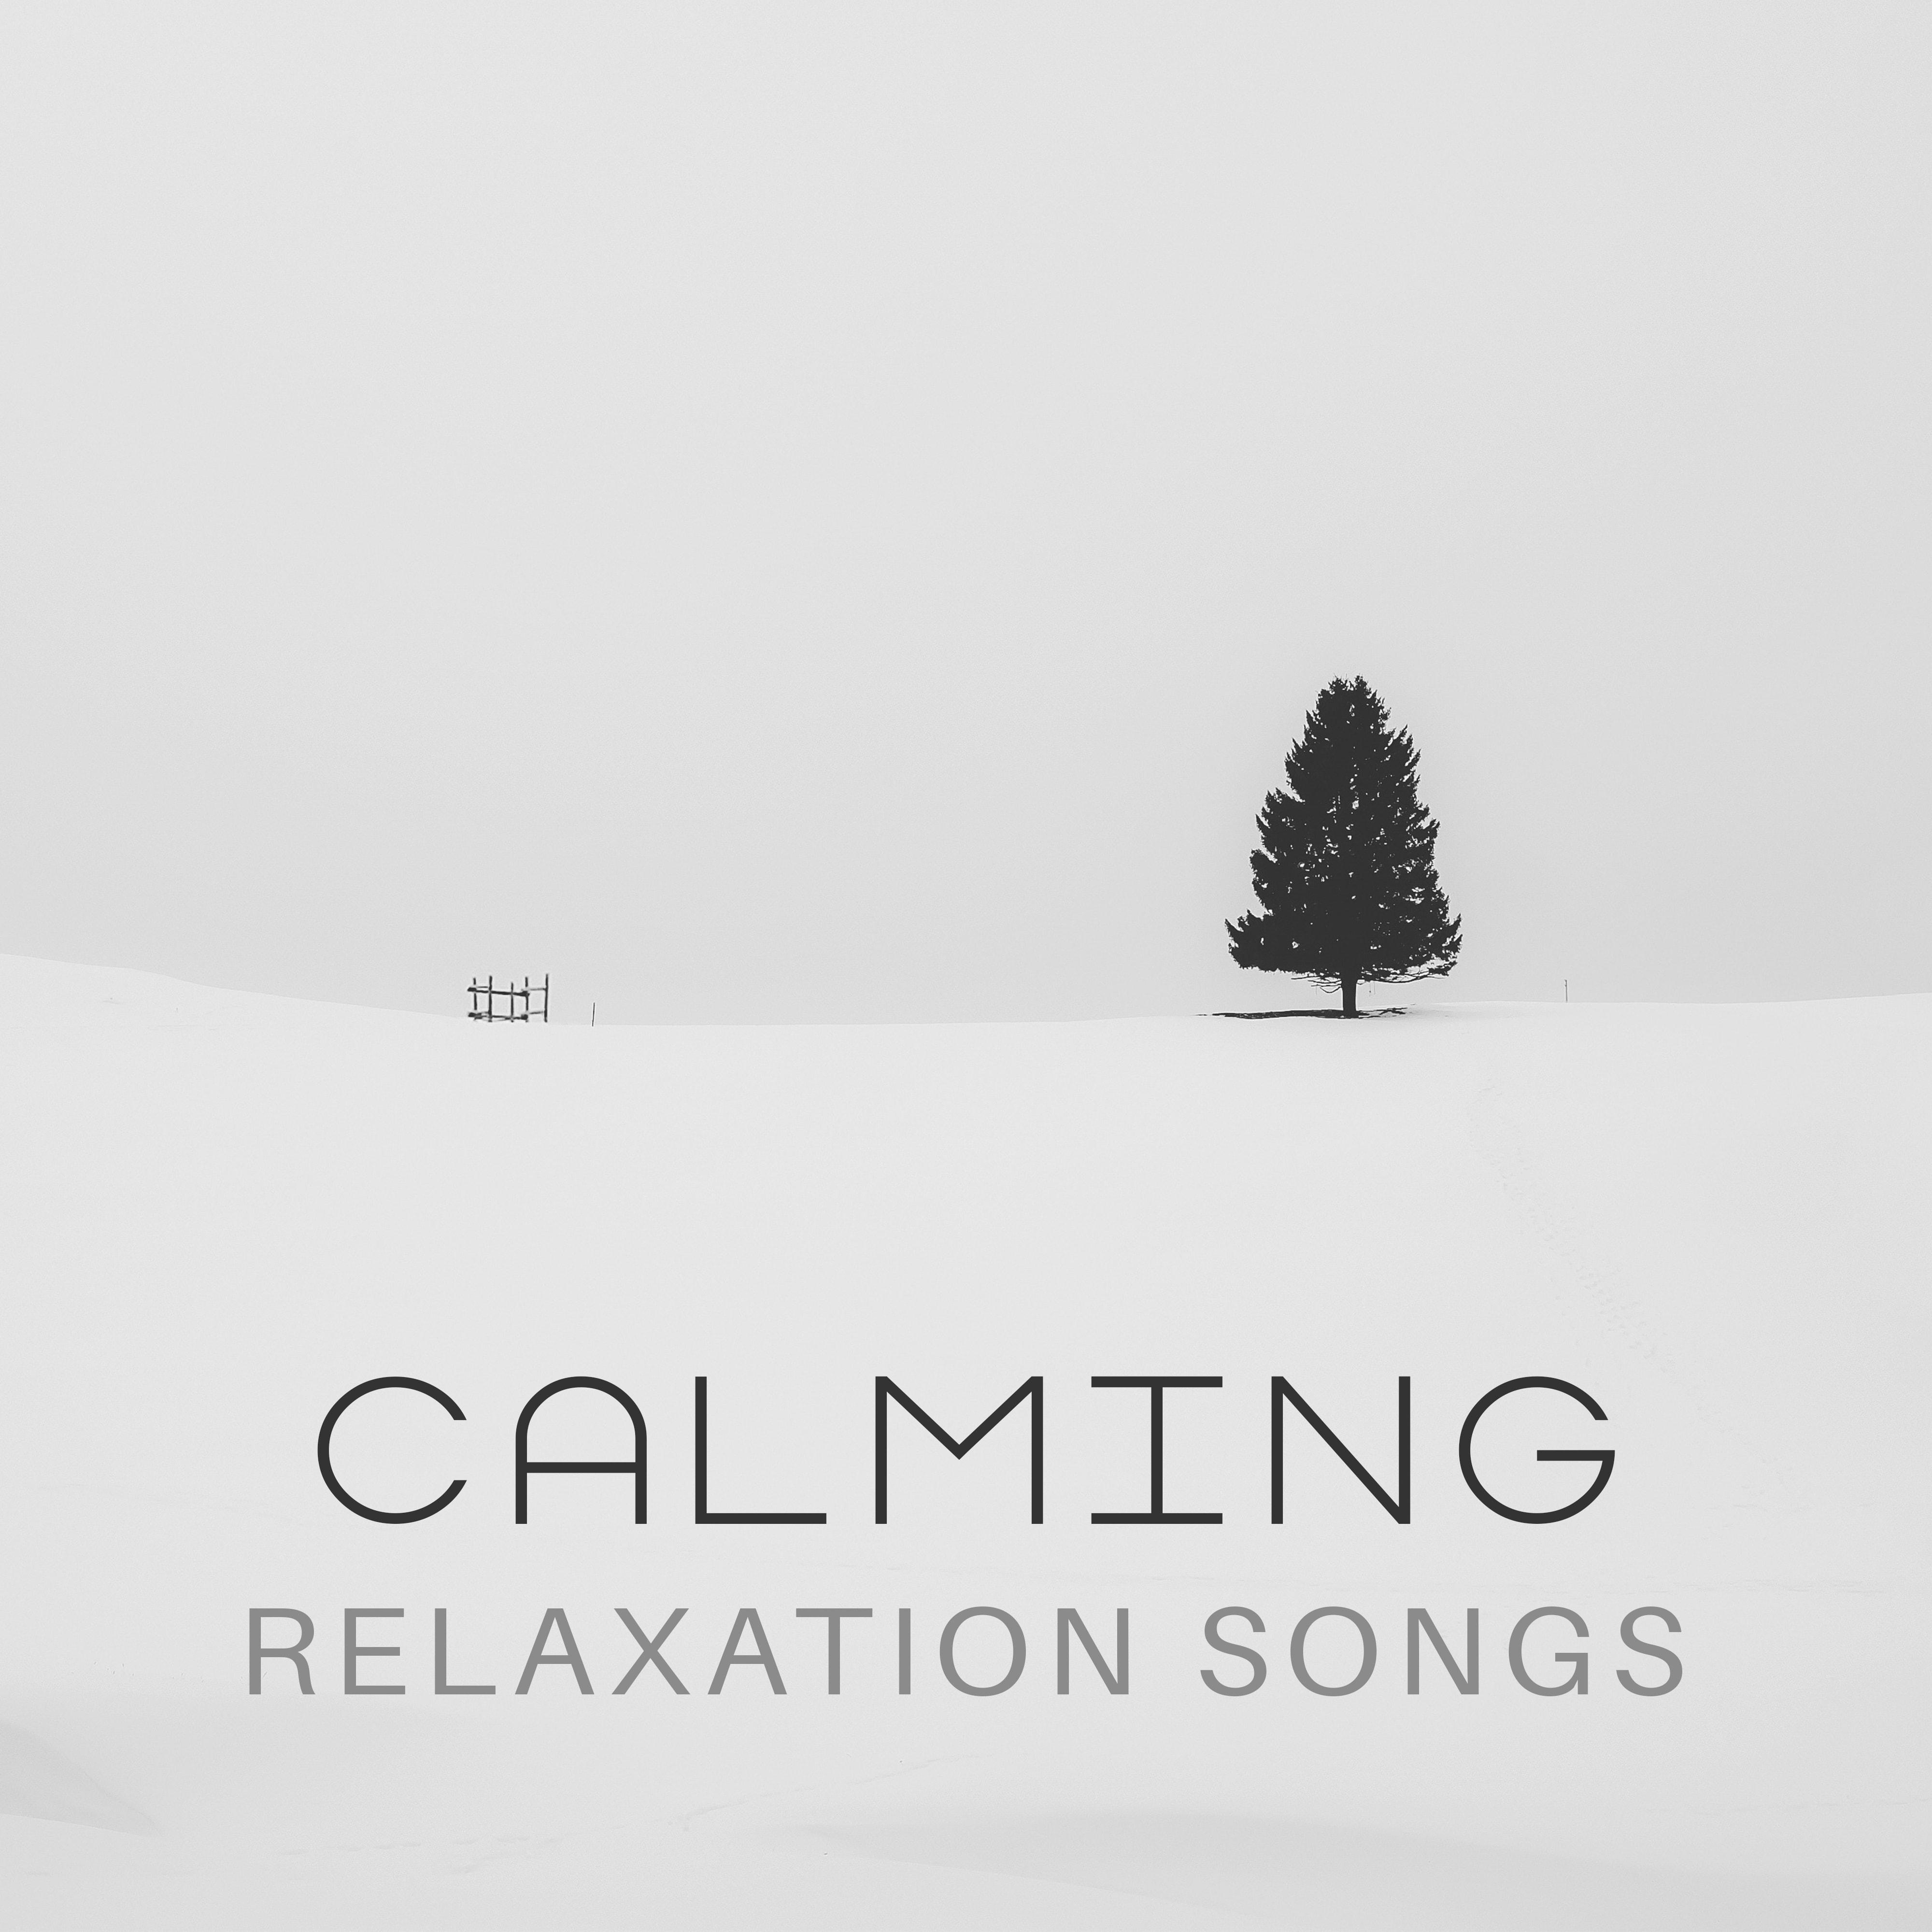 Calming Relaxation Songs